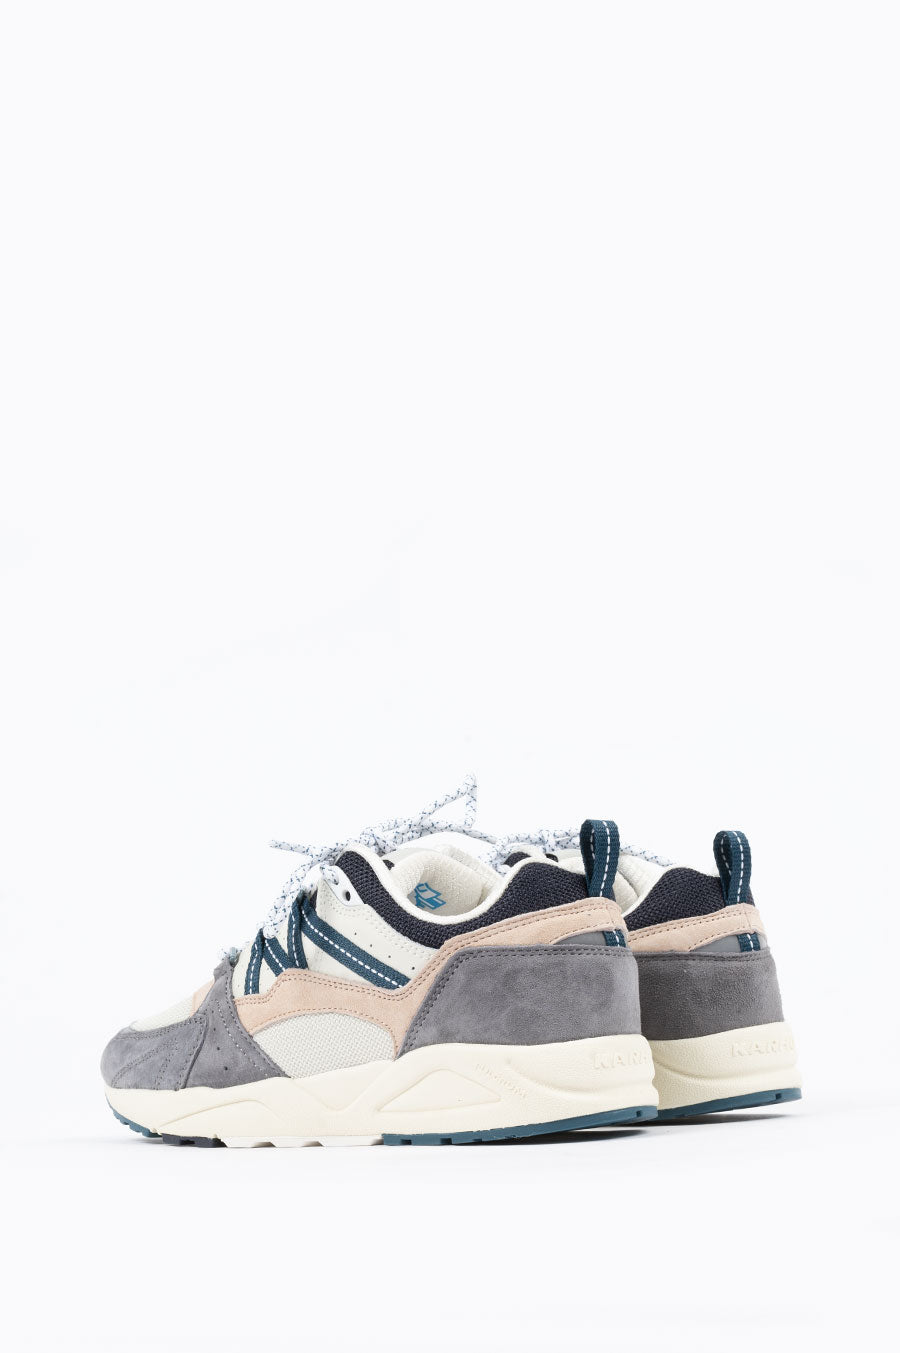 KARHU FUSION 2.0 FROST GRAY BLUE CORAL